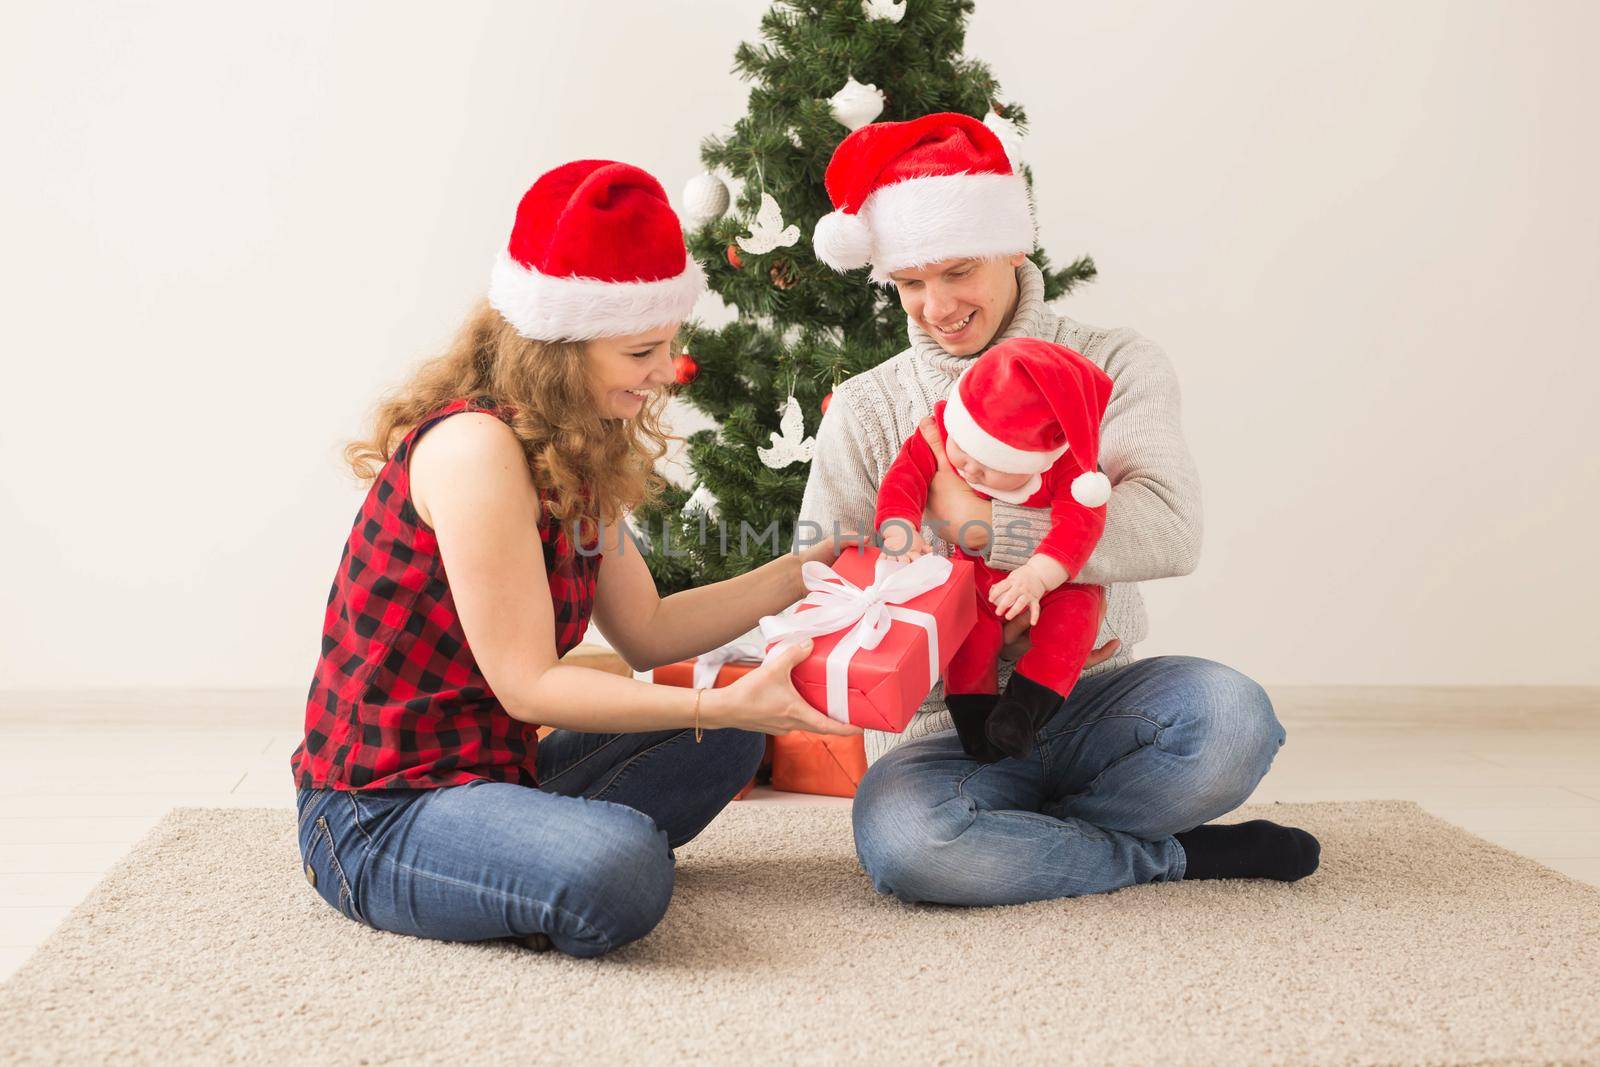 Holidays, children and family concept - Happy couple with baby celebrating Christmas together at home